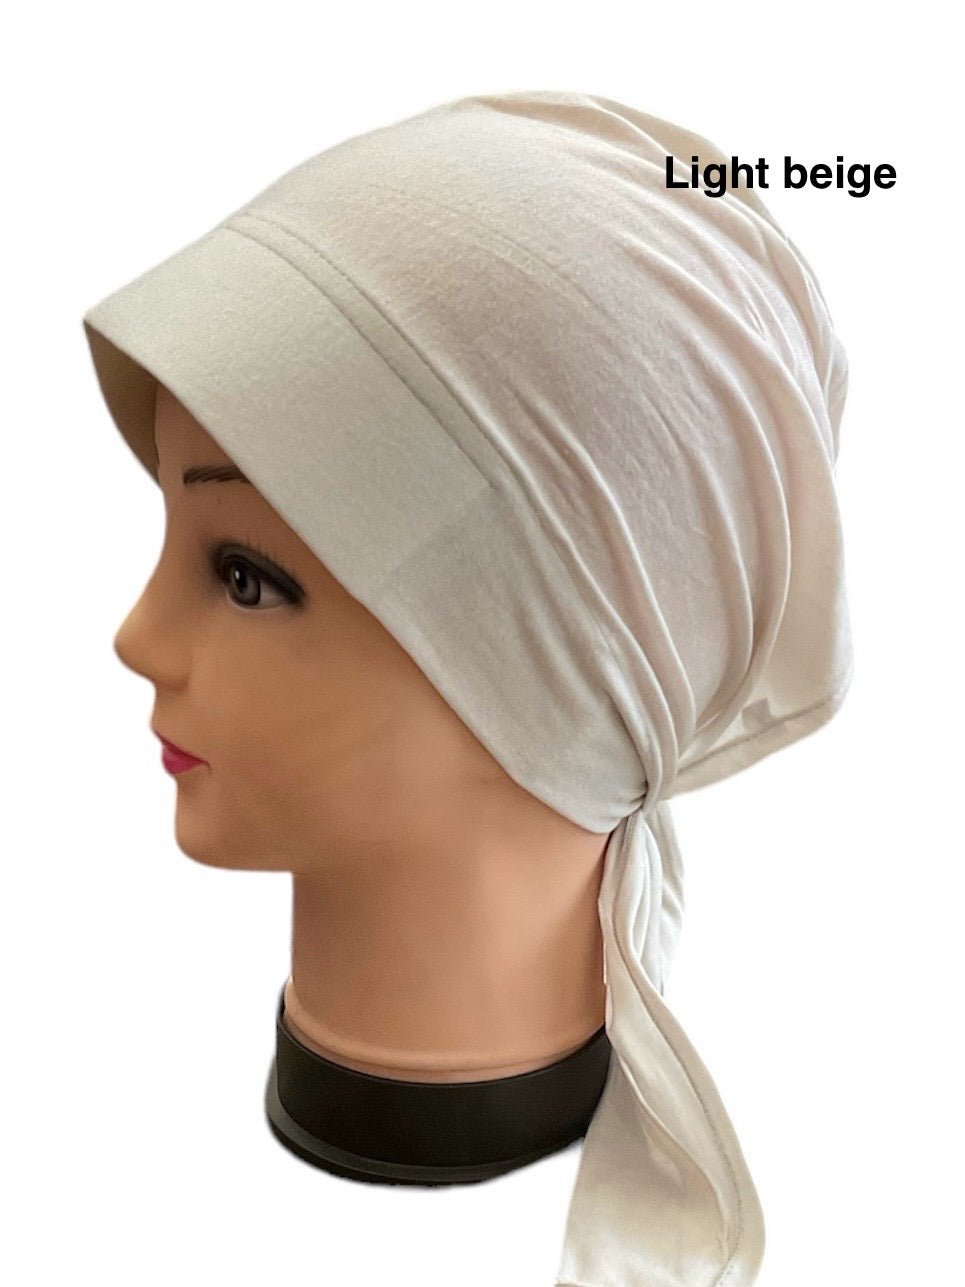 Turban Padded Under Scarf Cap with Tie in the Back / Bonnet cover , 100% Cotton, Hard Front Style made in Kuwait